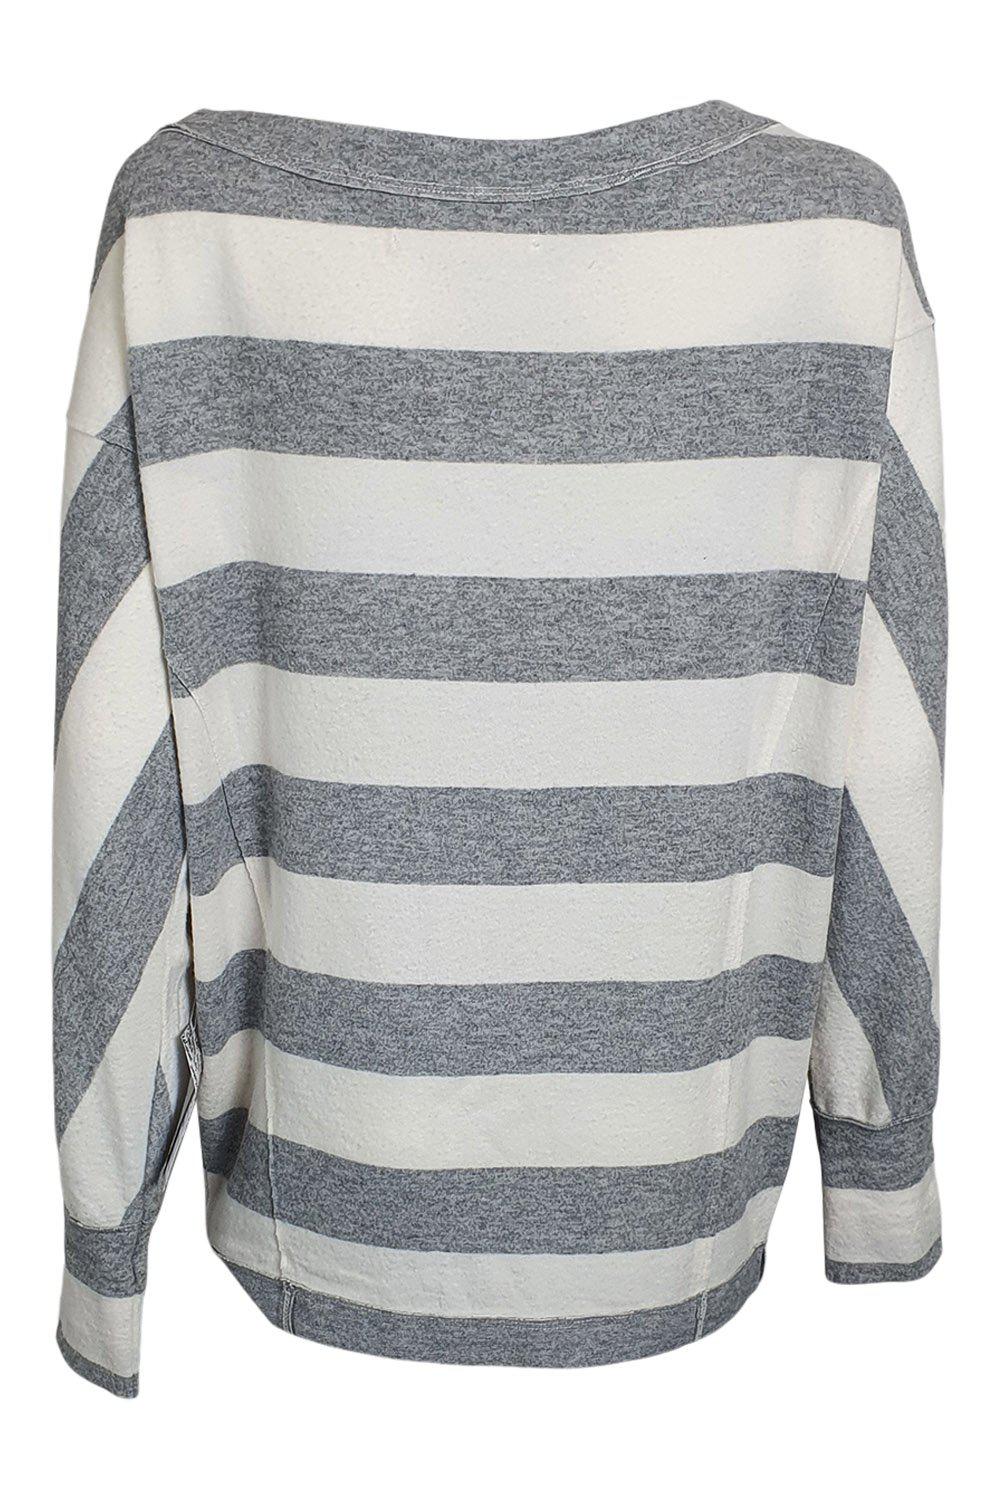 FREE PEOPLE Cali Grey White Striped Long Sleeved Jumper (XS)-The Freperie